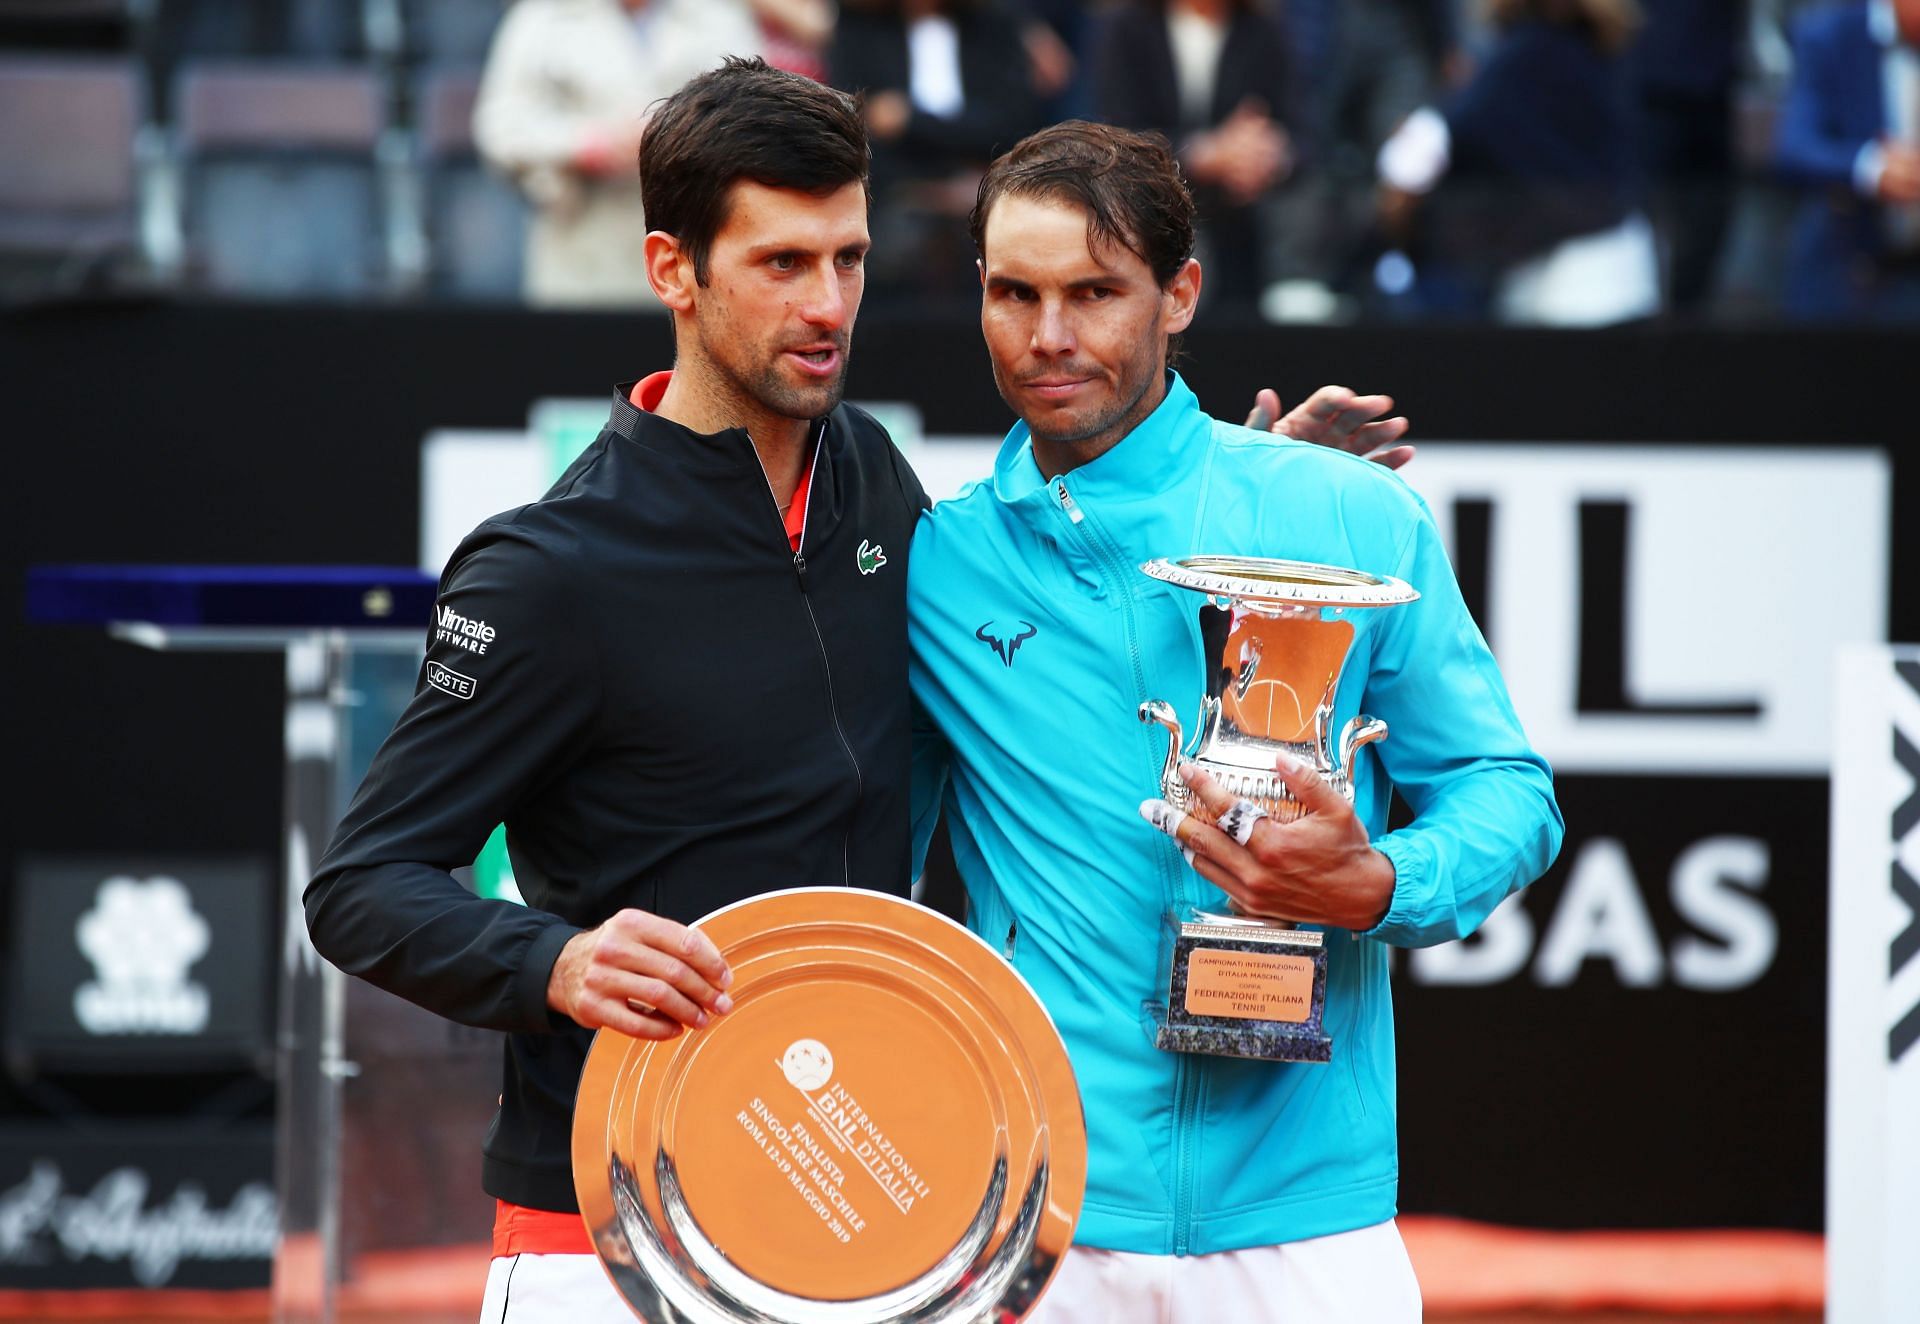 The Serb and the Spaniard at the 2019 Italian Open